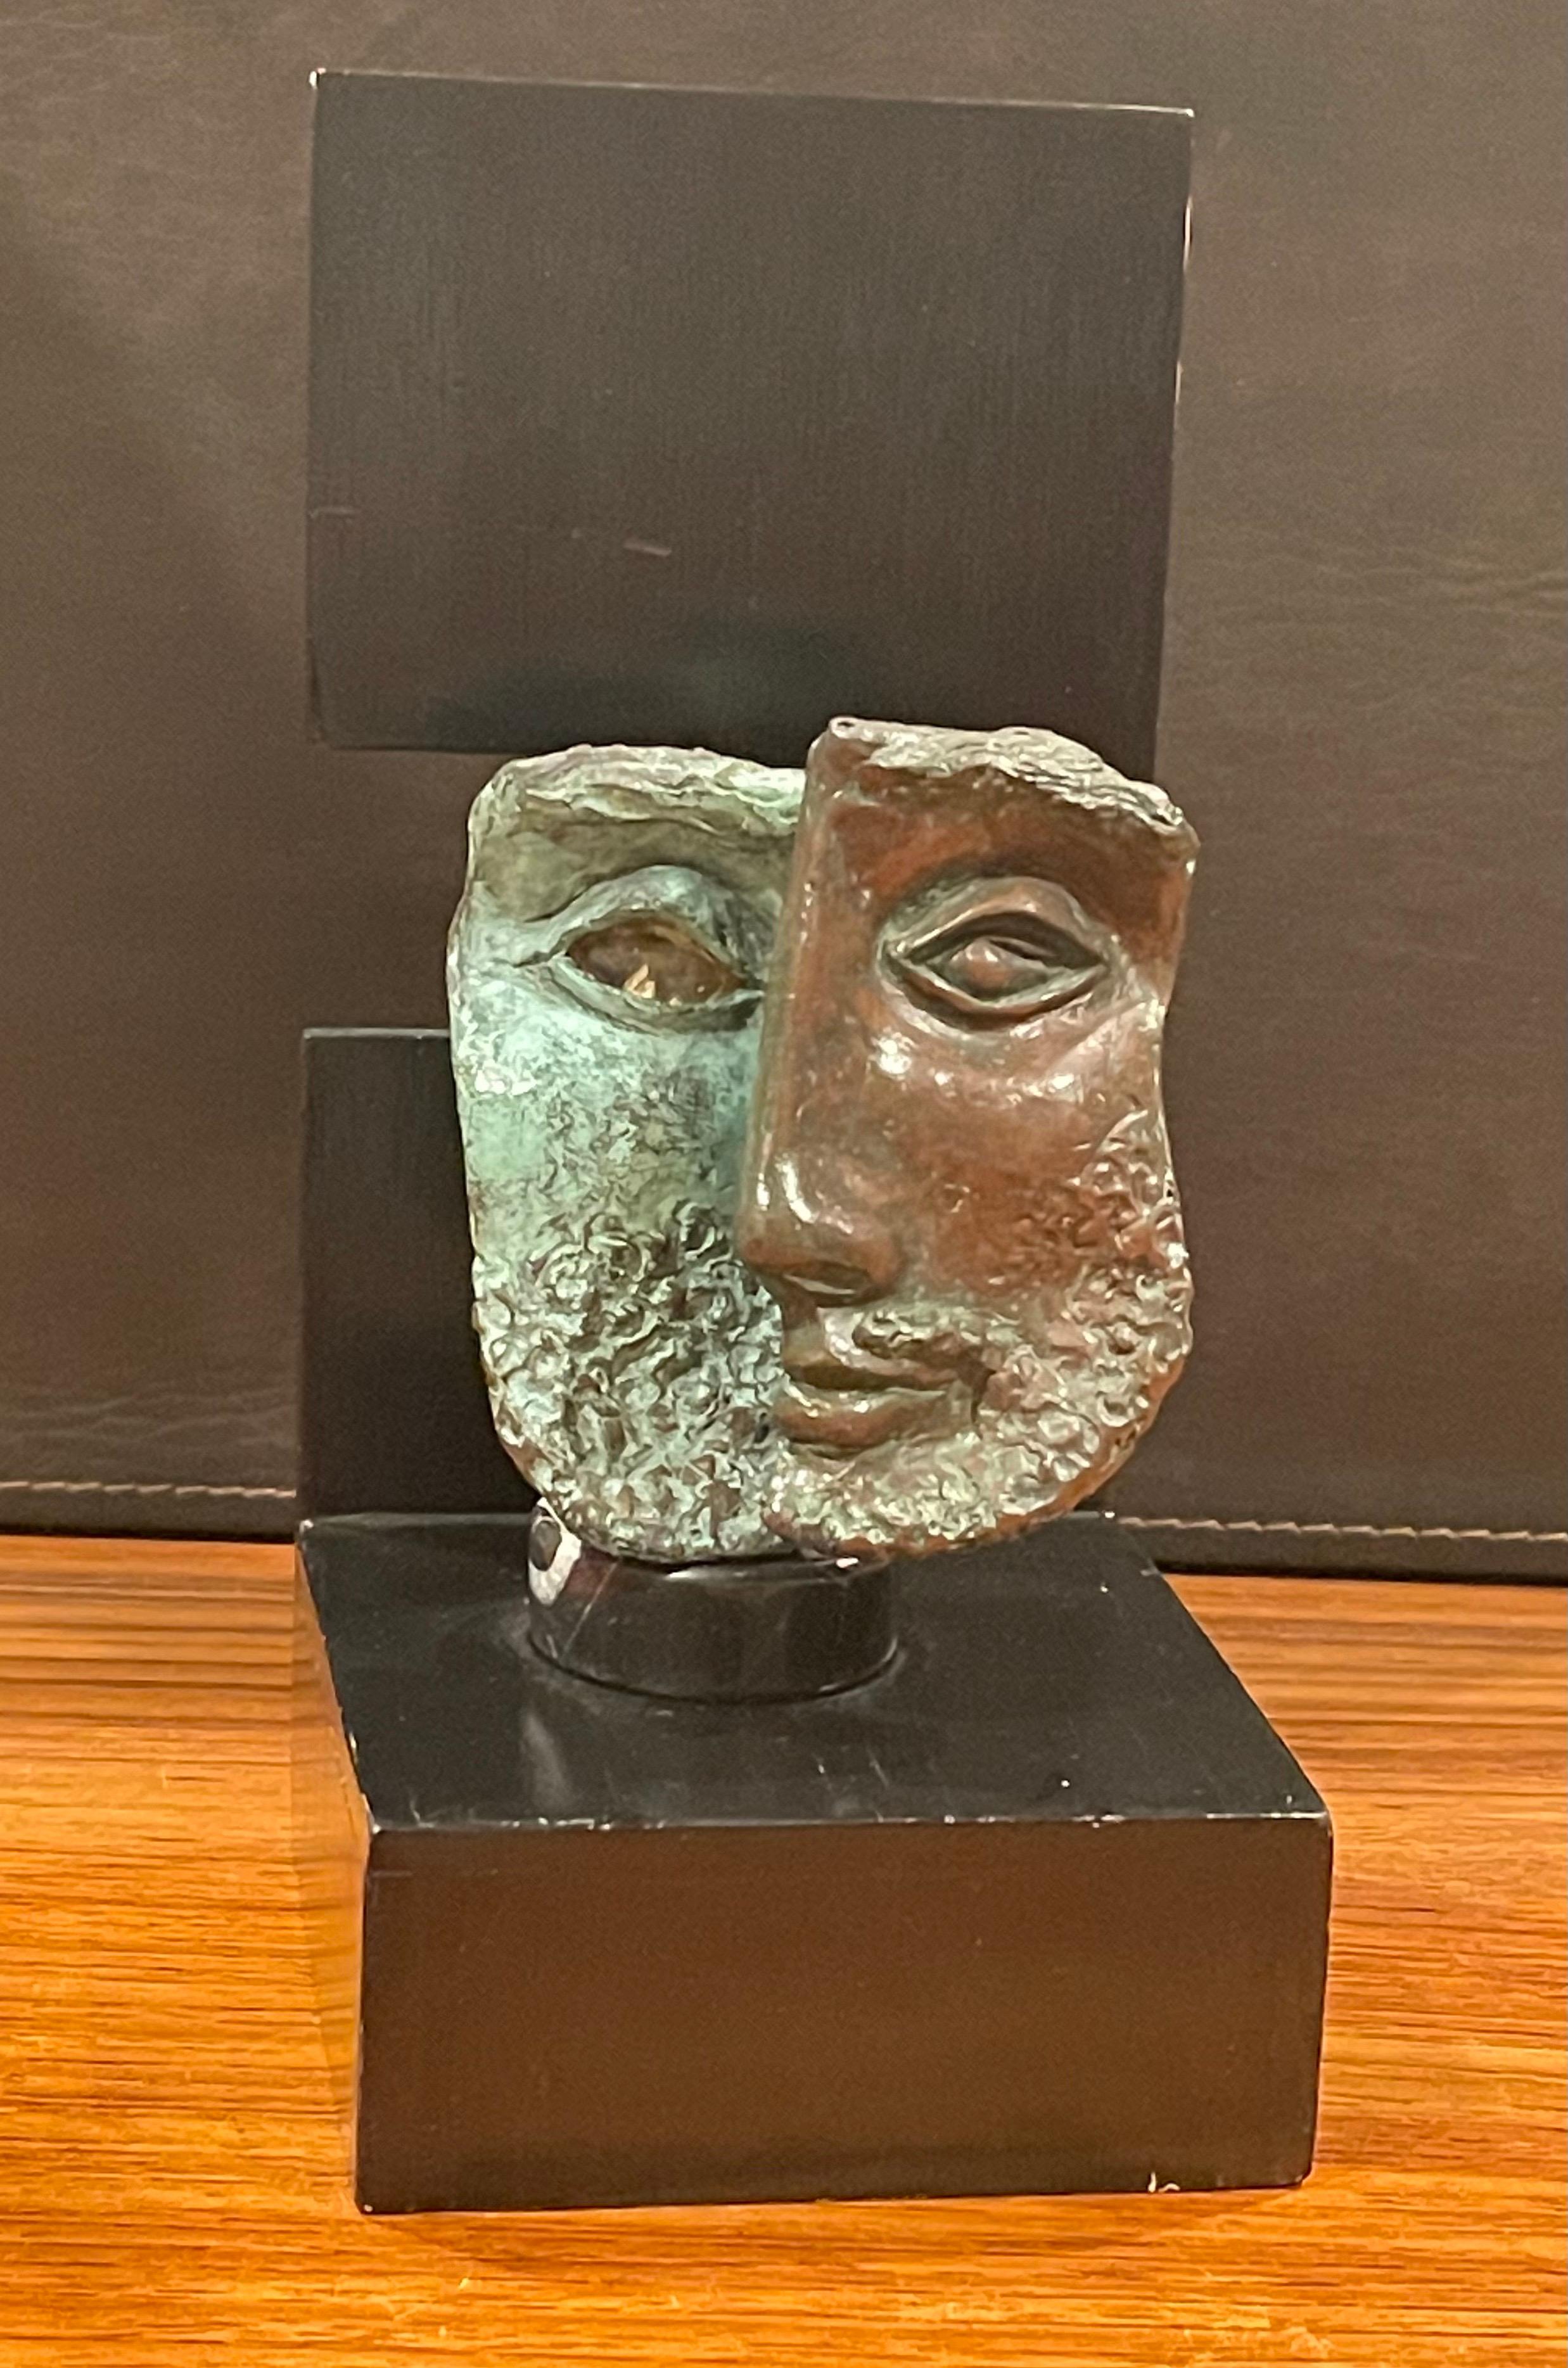 Modernist patinated bronze sculpture on a black wood base, circa 1960s. The piece has a 3-dimensional face (Julius Ceasar?) in bronze that is mounted to a small marble disk and the attached to a black wood base. The face is presented in two separate